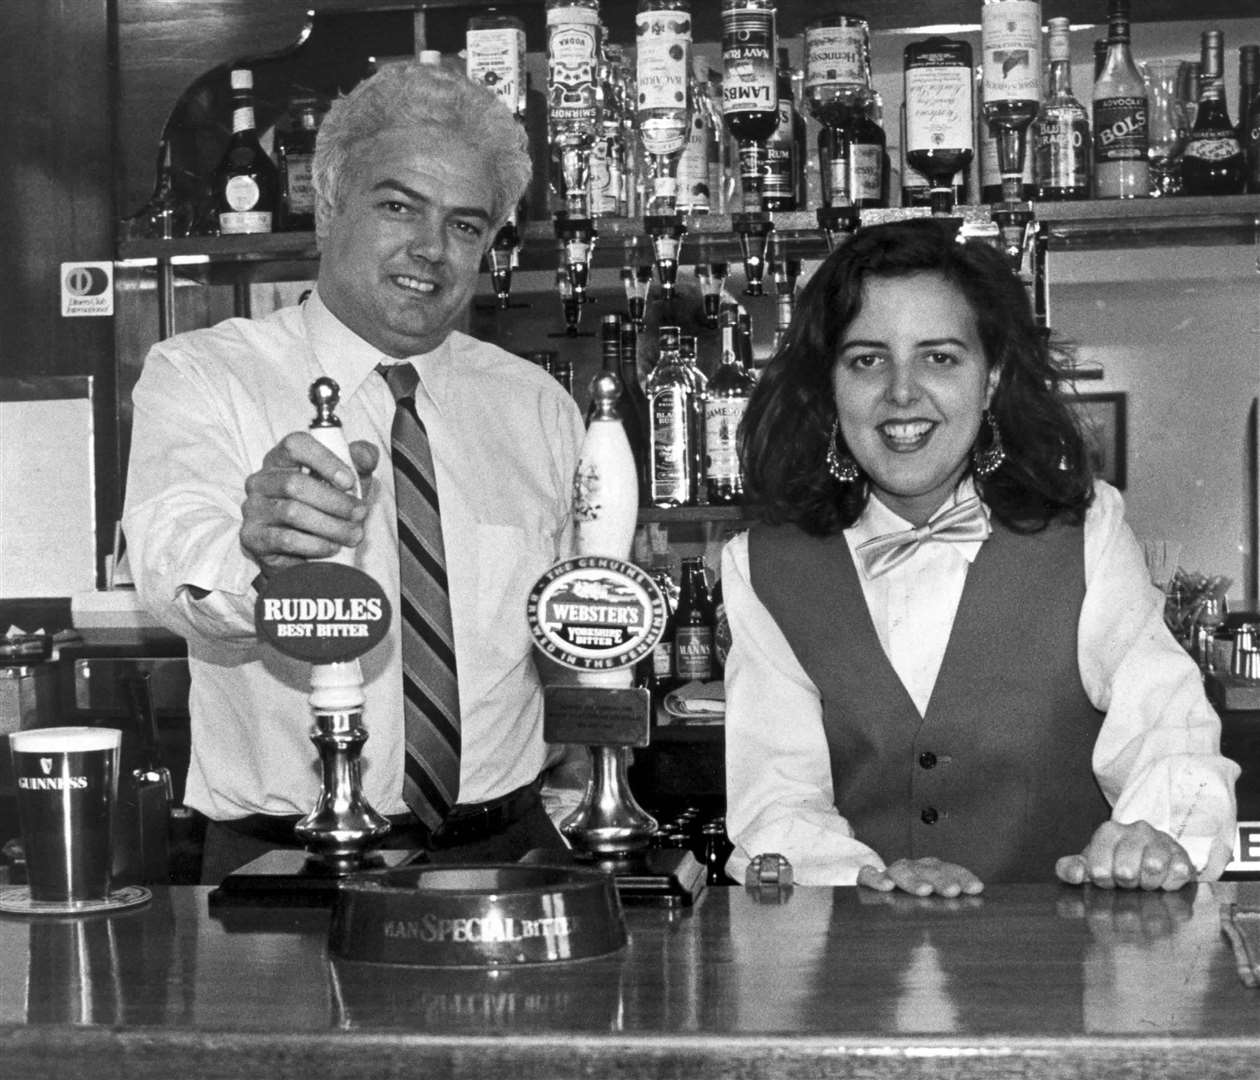 Behind the bar at the Three Daws in 1988